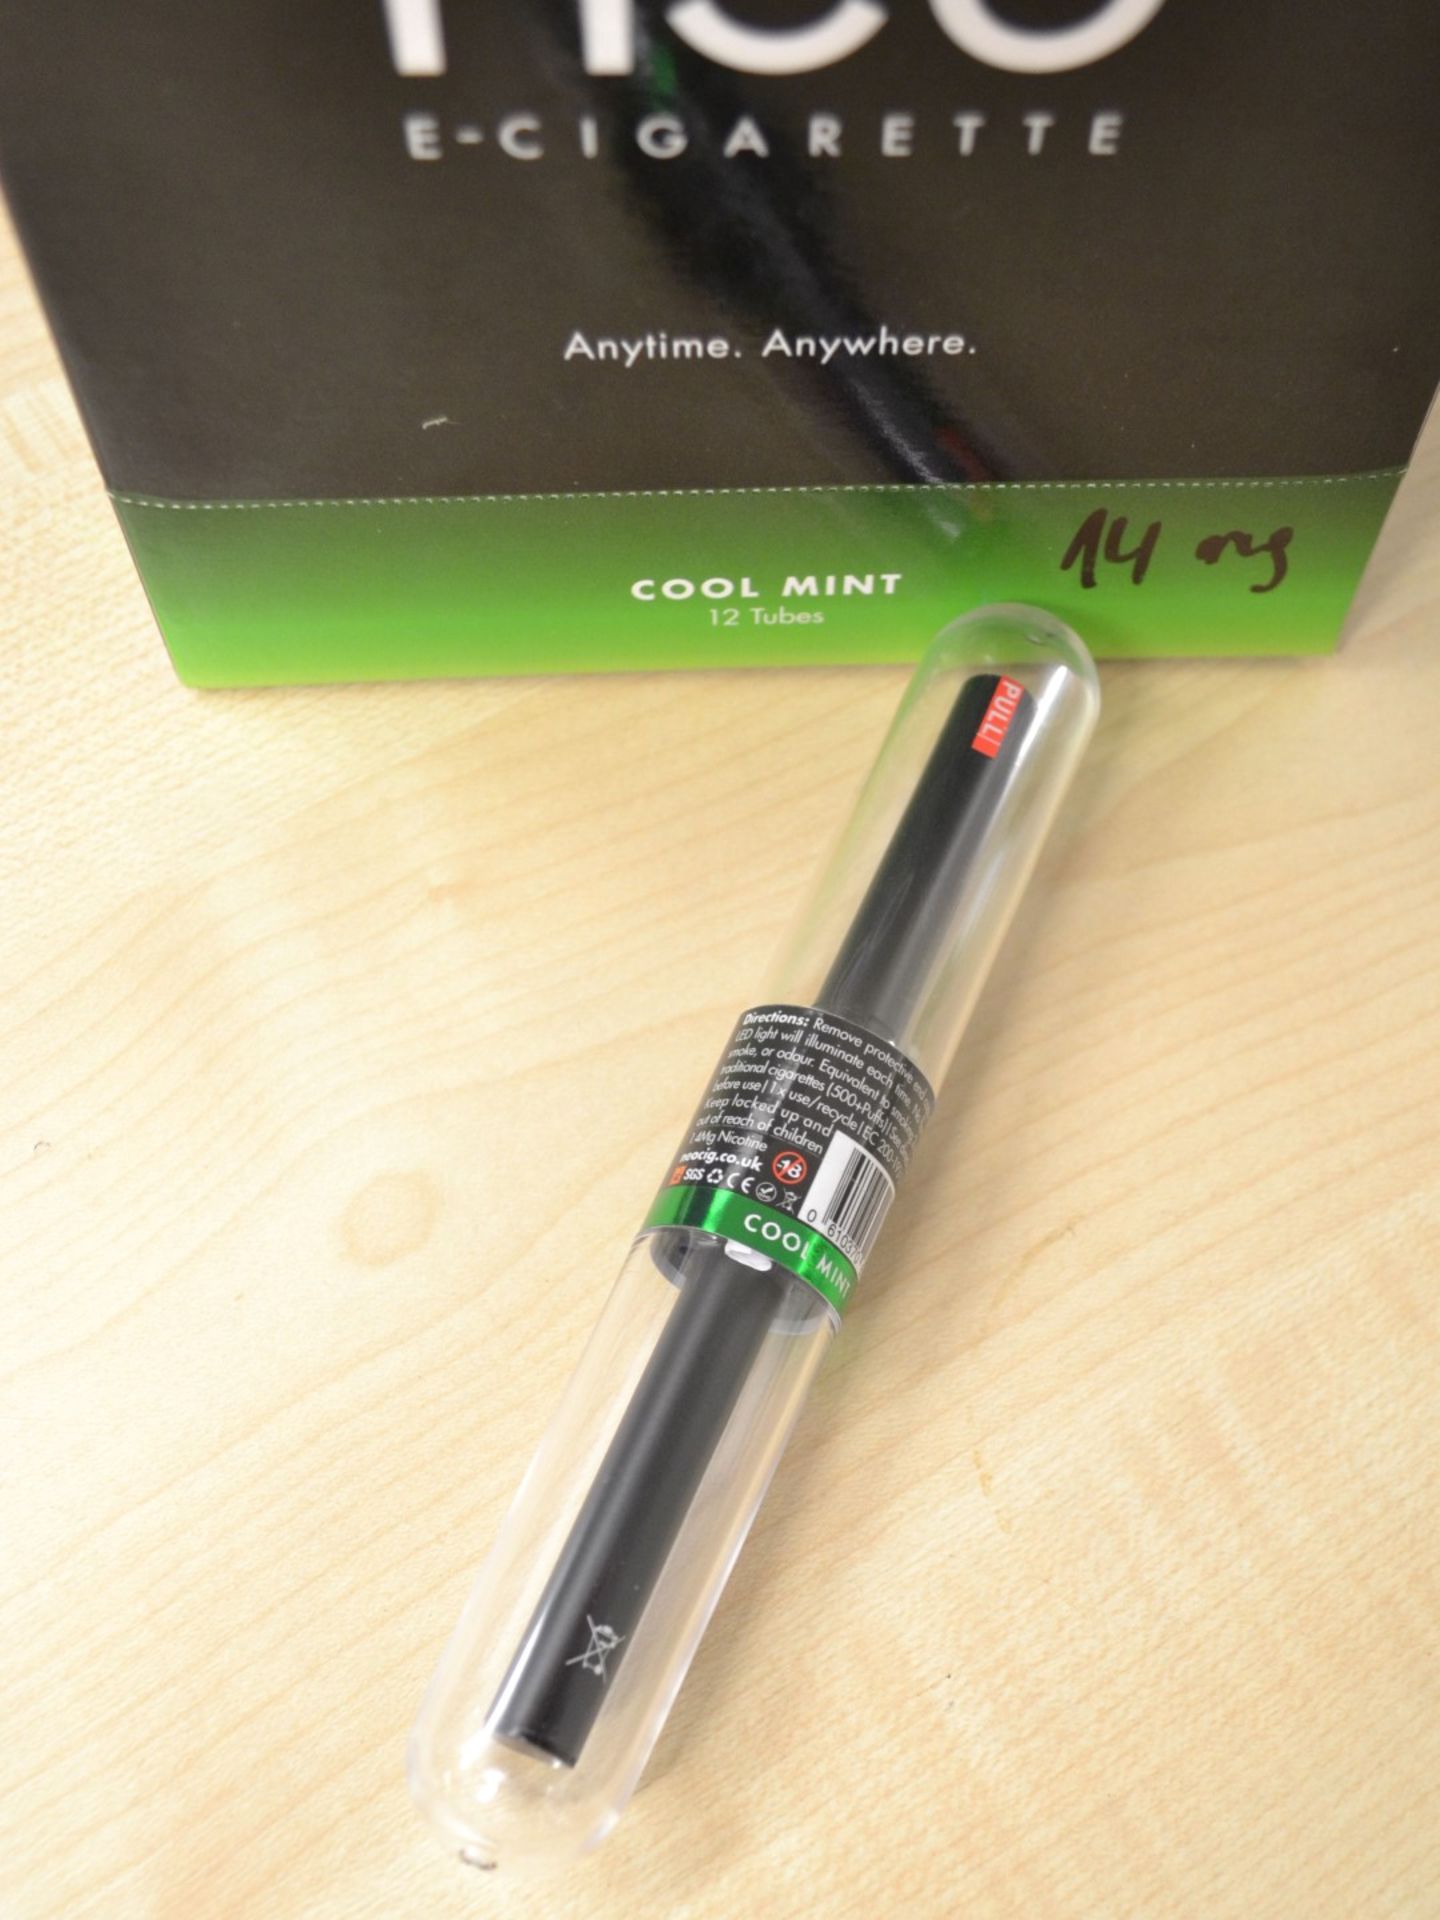 24 x Neo E-Cigarettes Cool Mint Disposable Electronic Cigarettes - New & Sealed Stock - CL185 - Ref: - Image 8 of 8